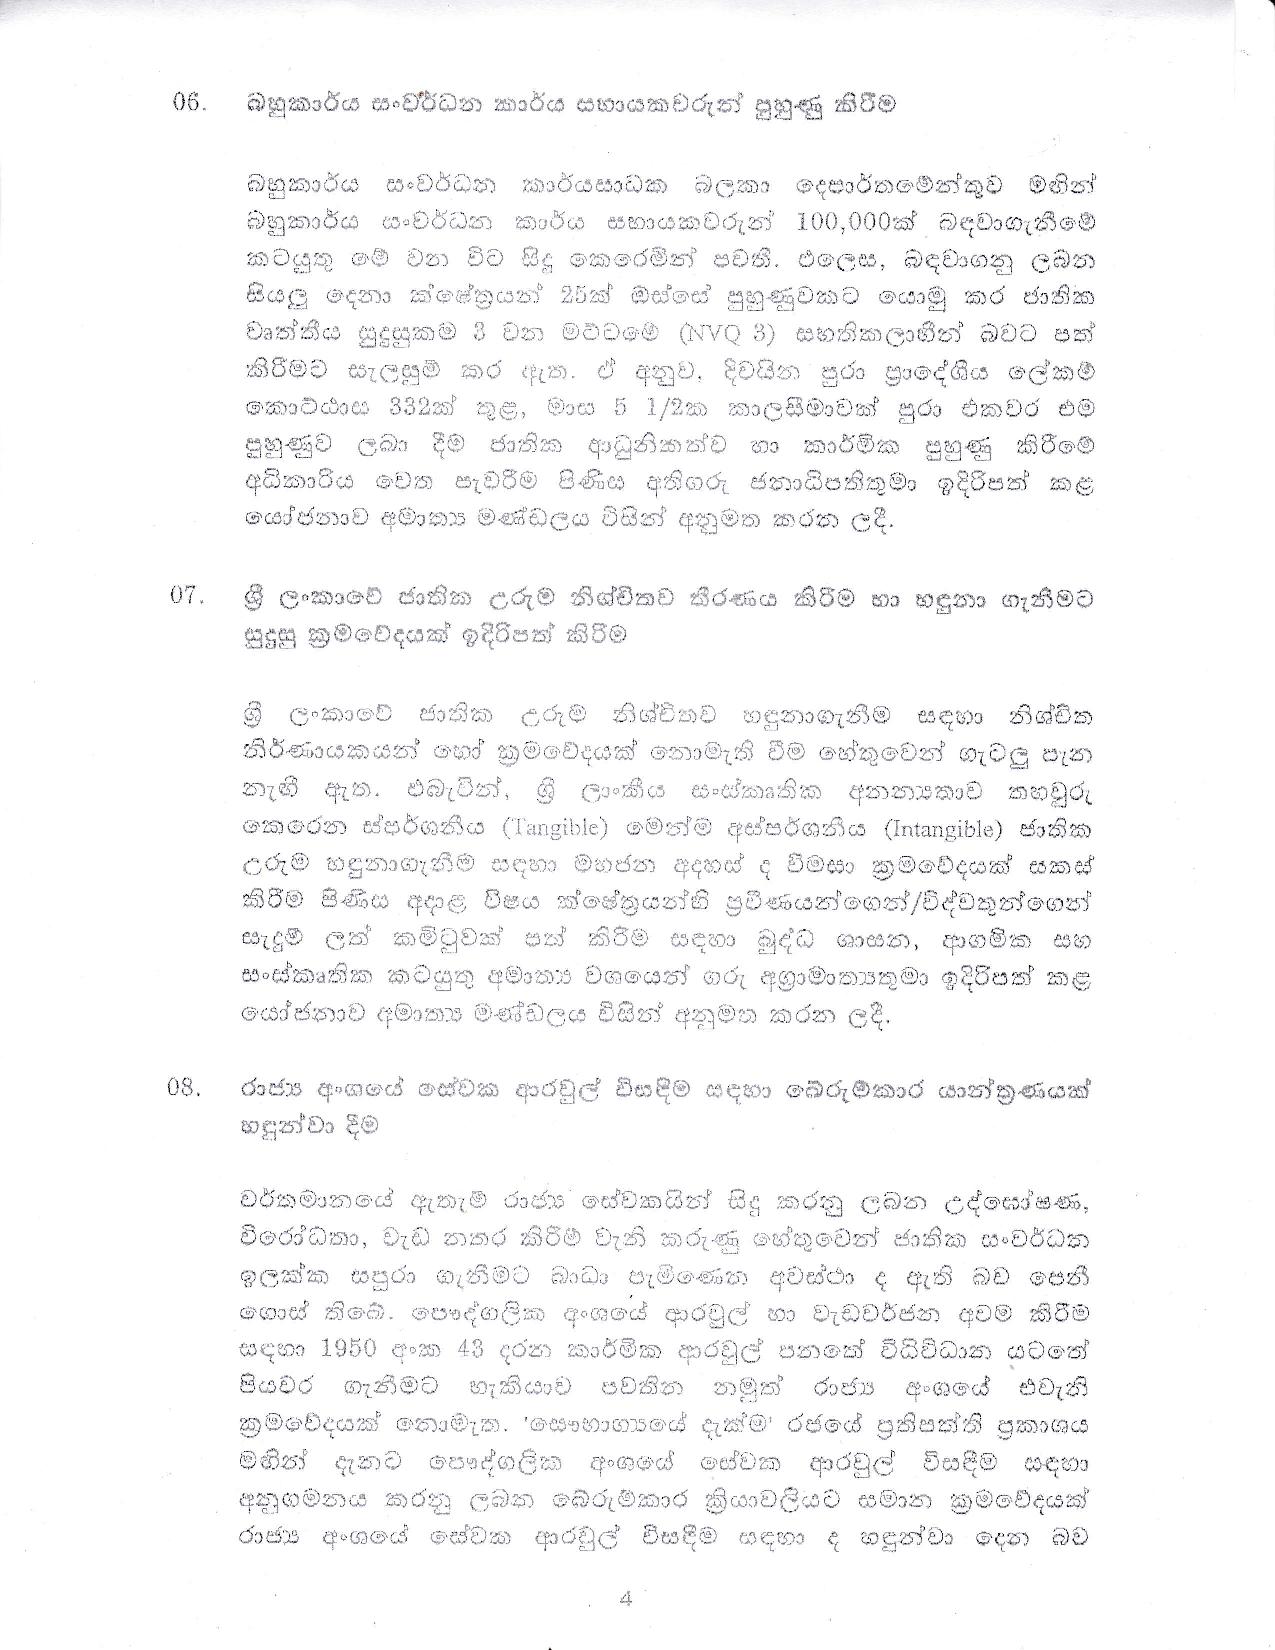 Cabinet Decision on 16.11.2020 page 004